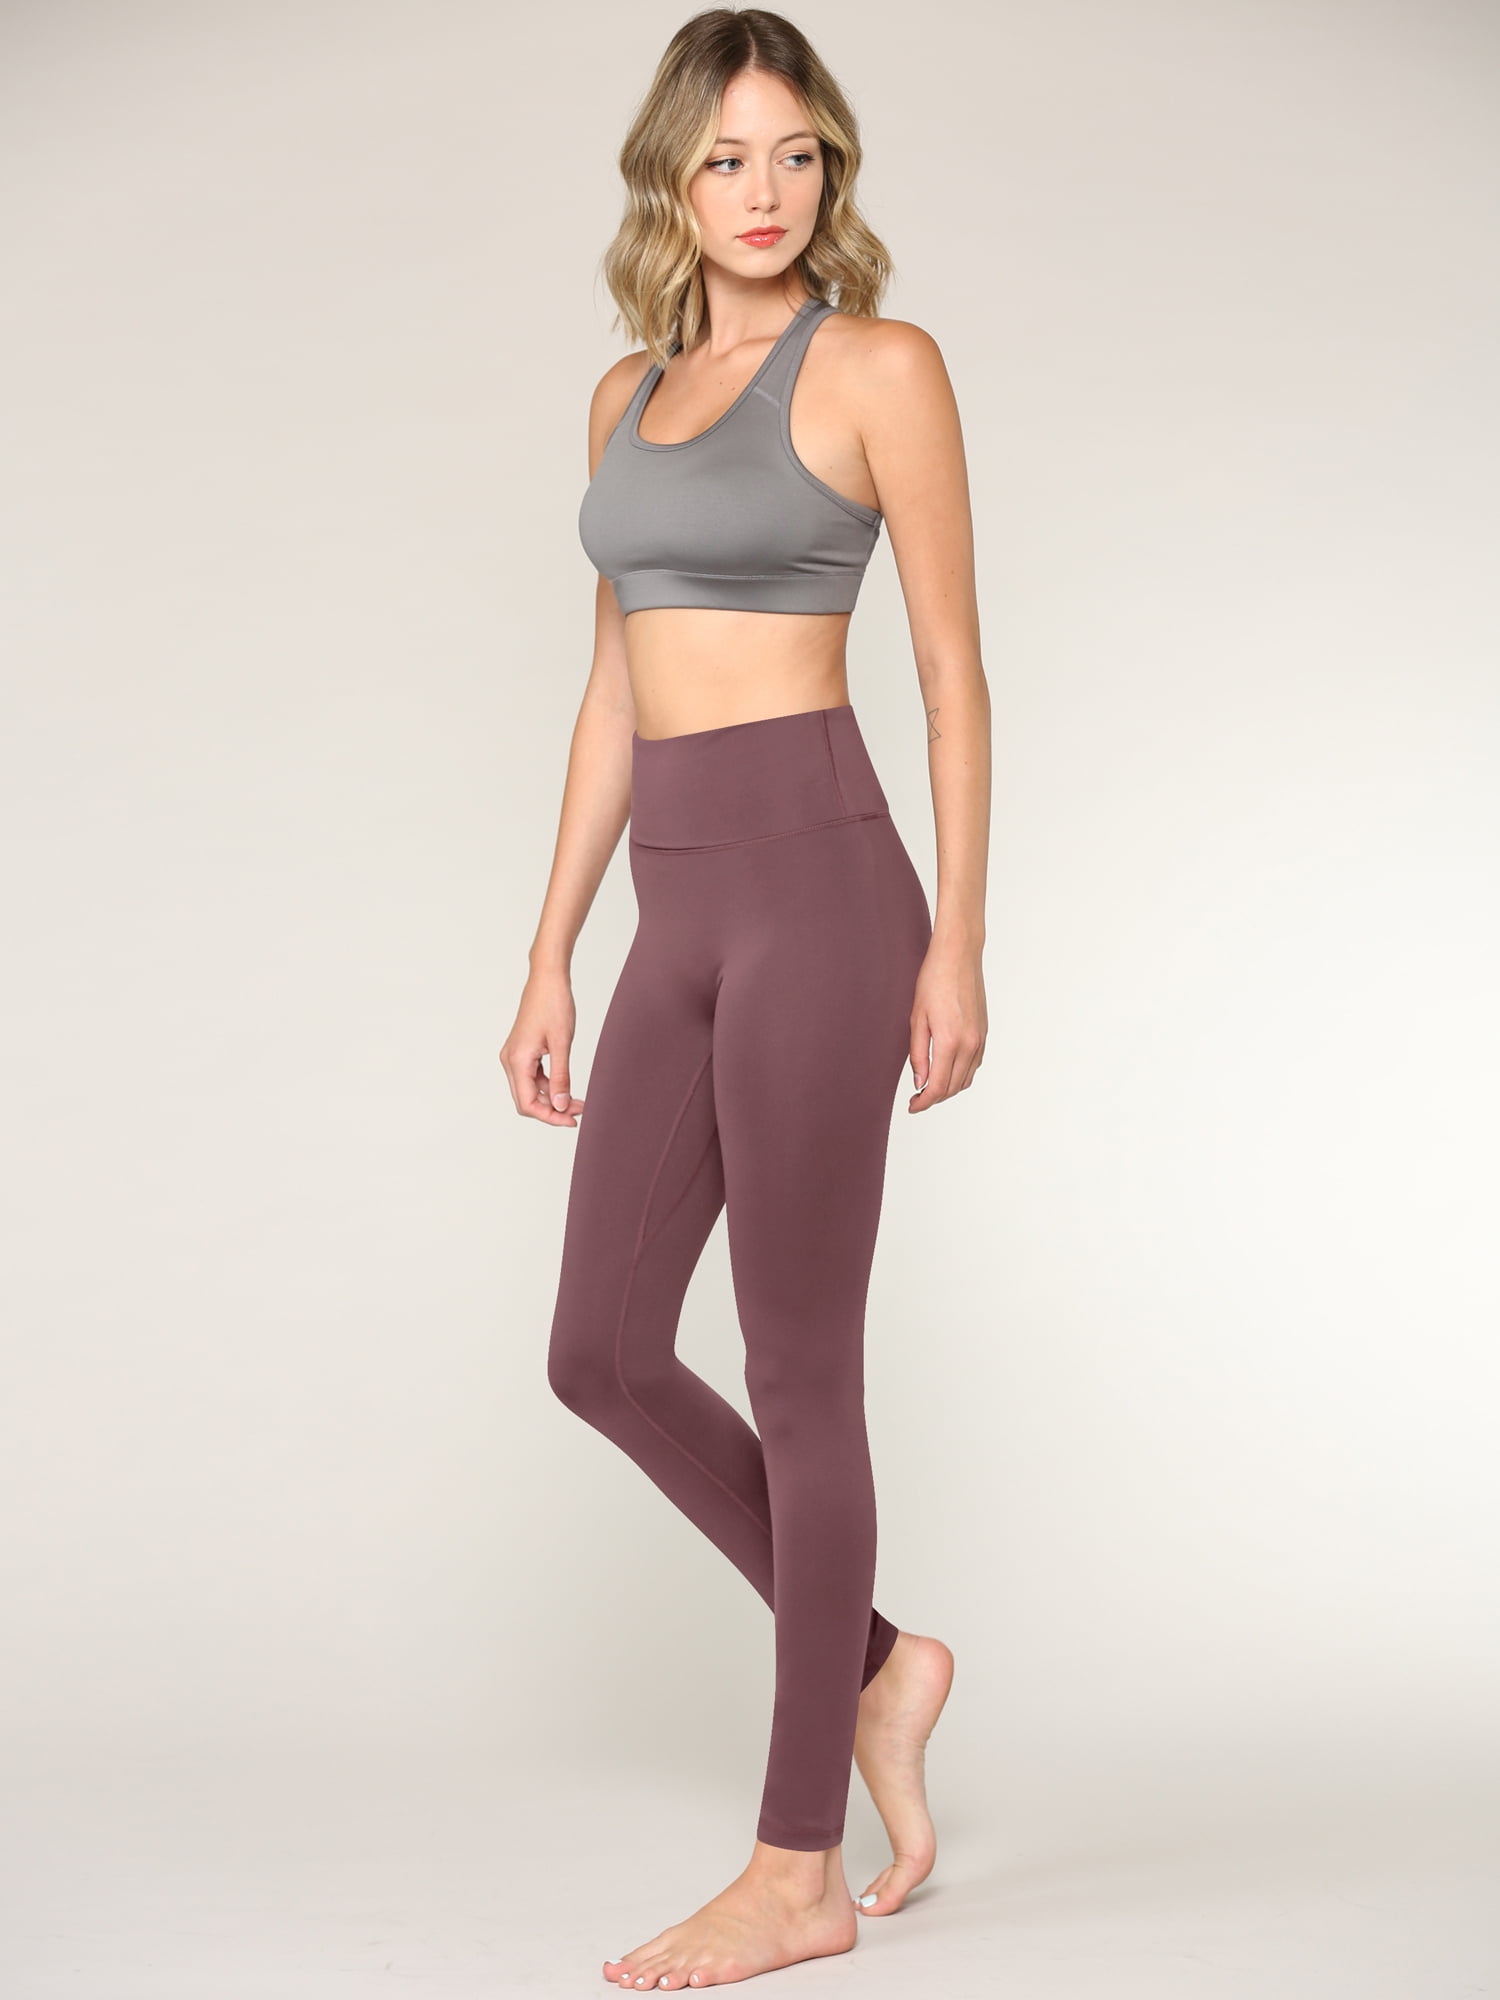 Made by Johnny Women's Peached Front Seamless Leggings with Inner Pocket  Full-Length Yoga Pants XS OLIVE